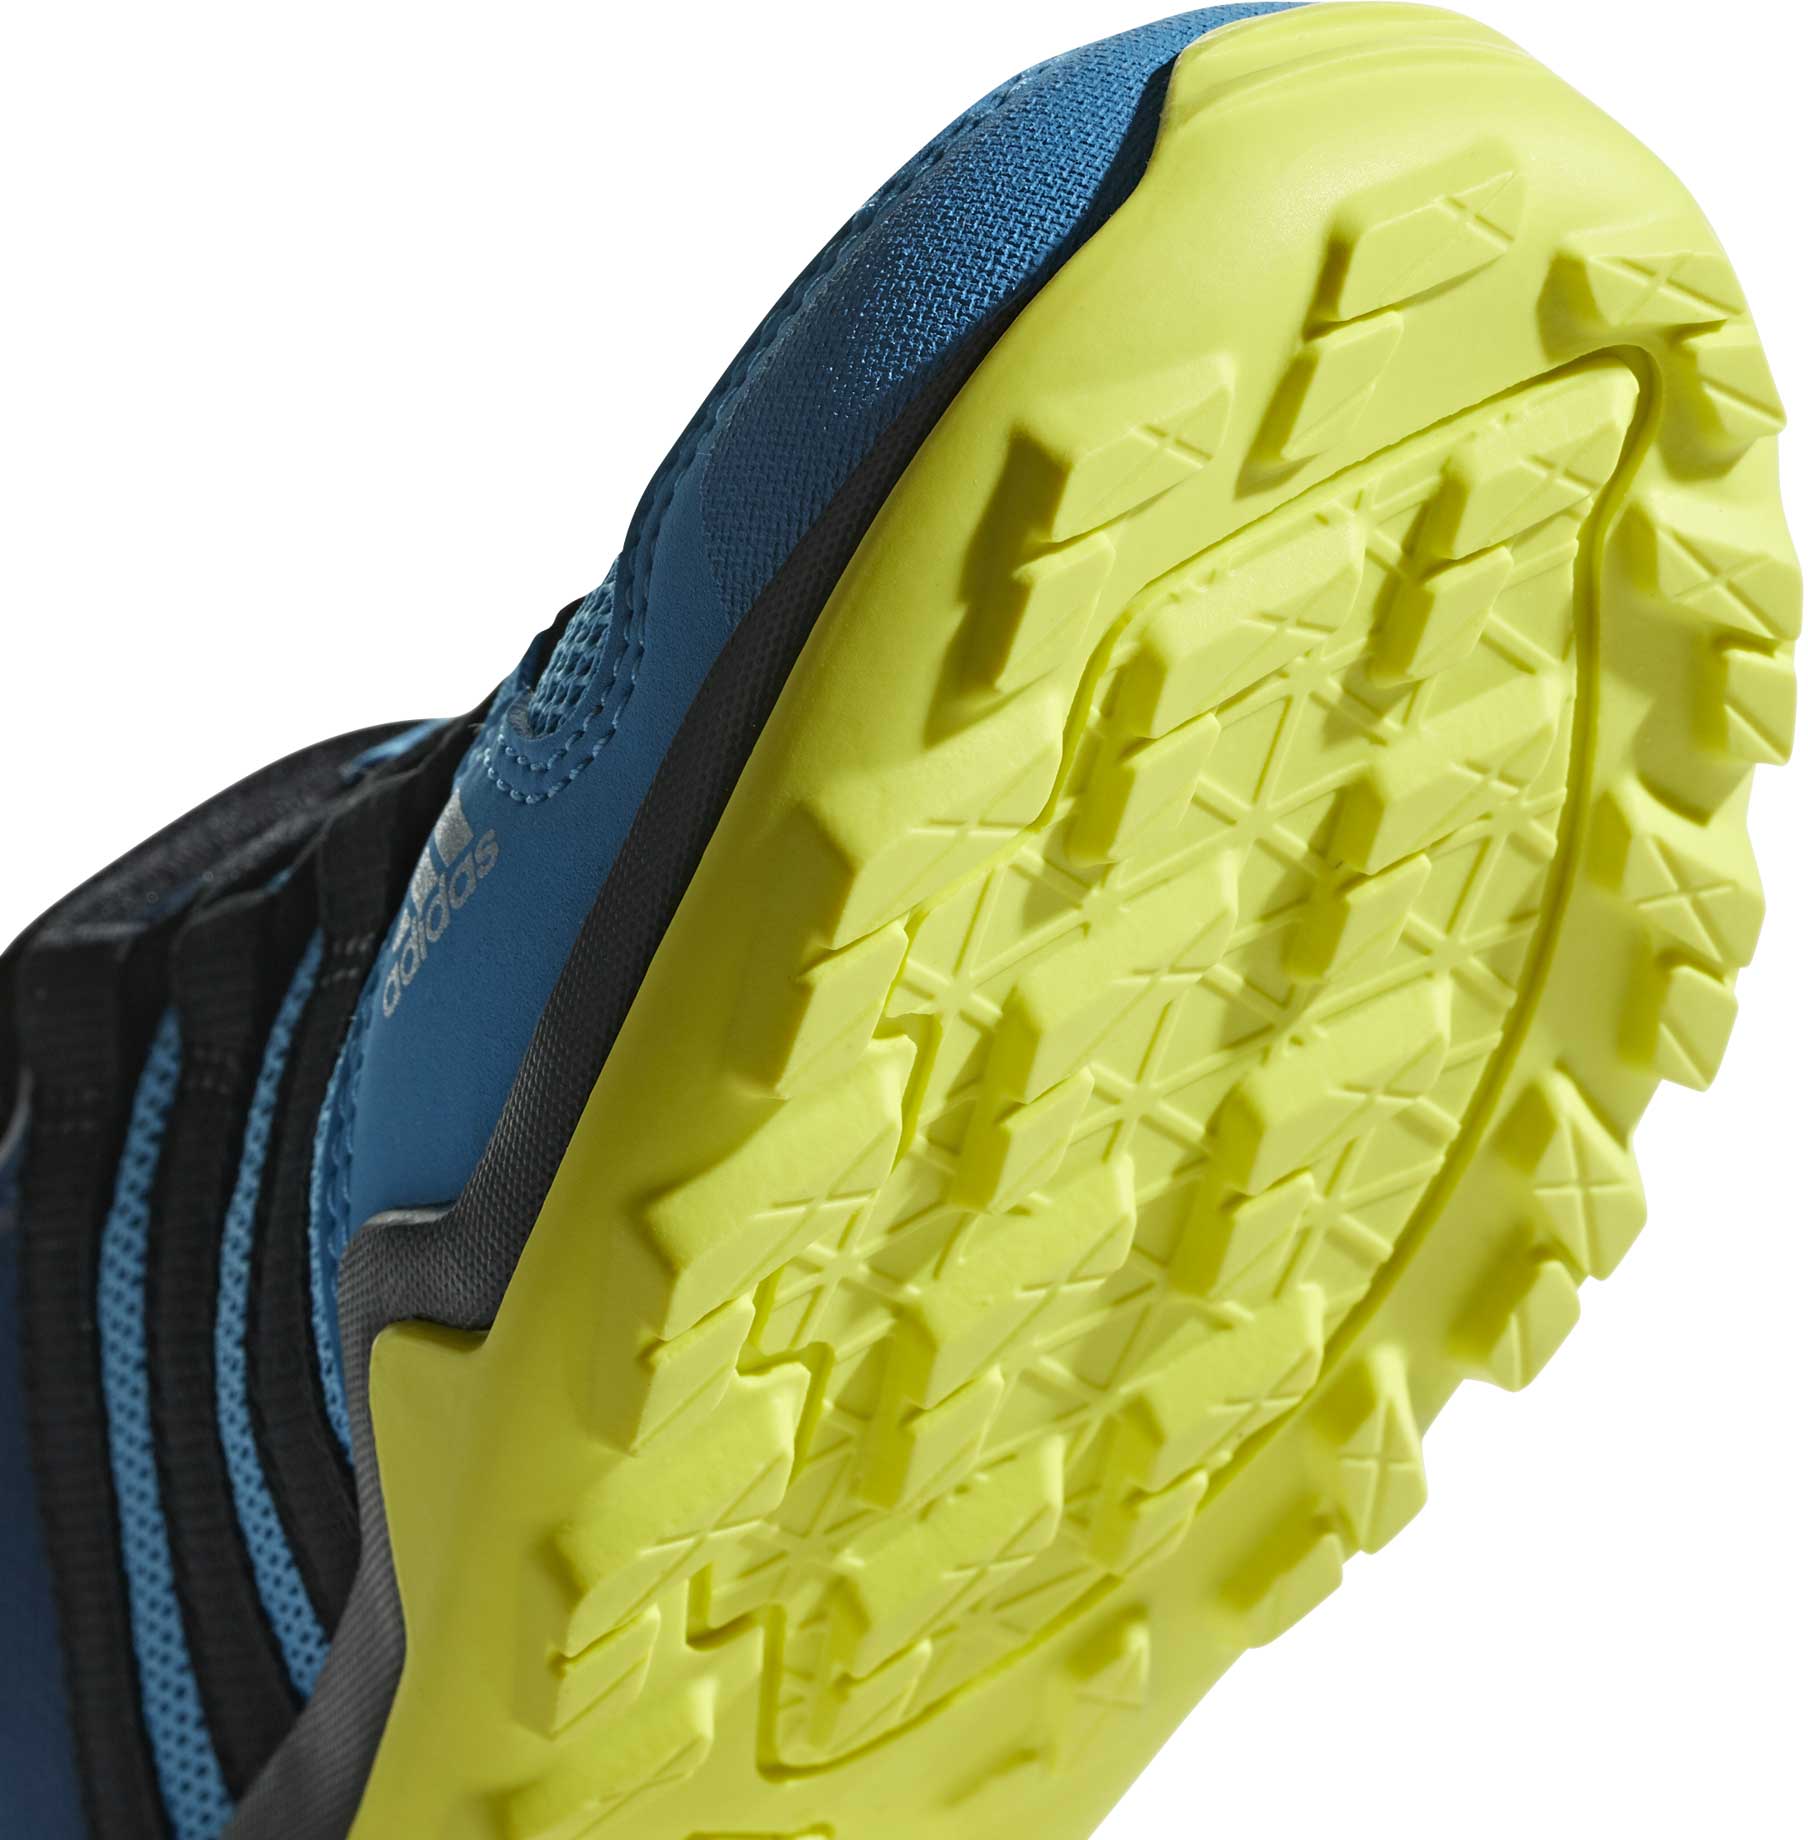 Kids' outdoor shoes